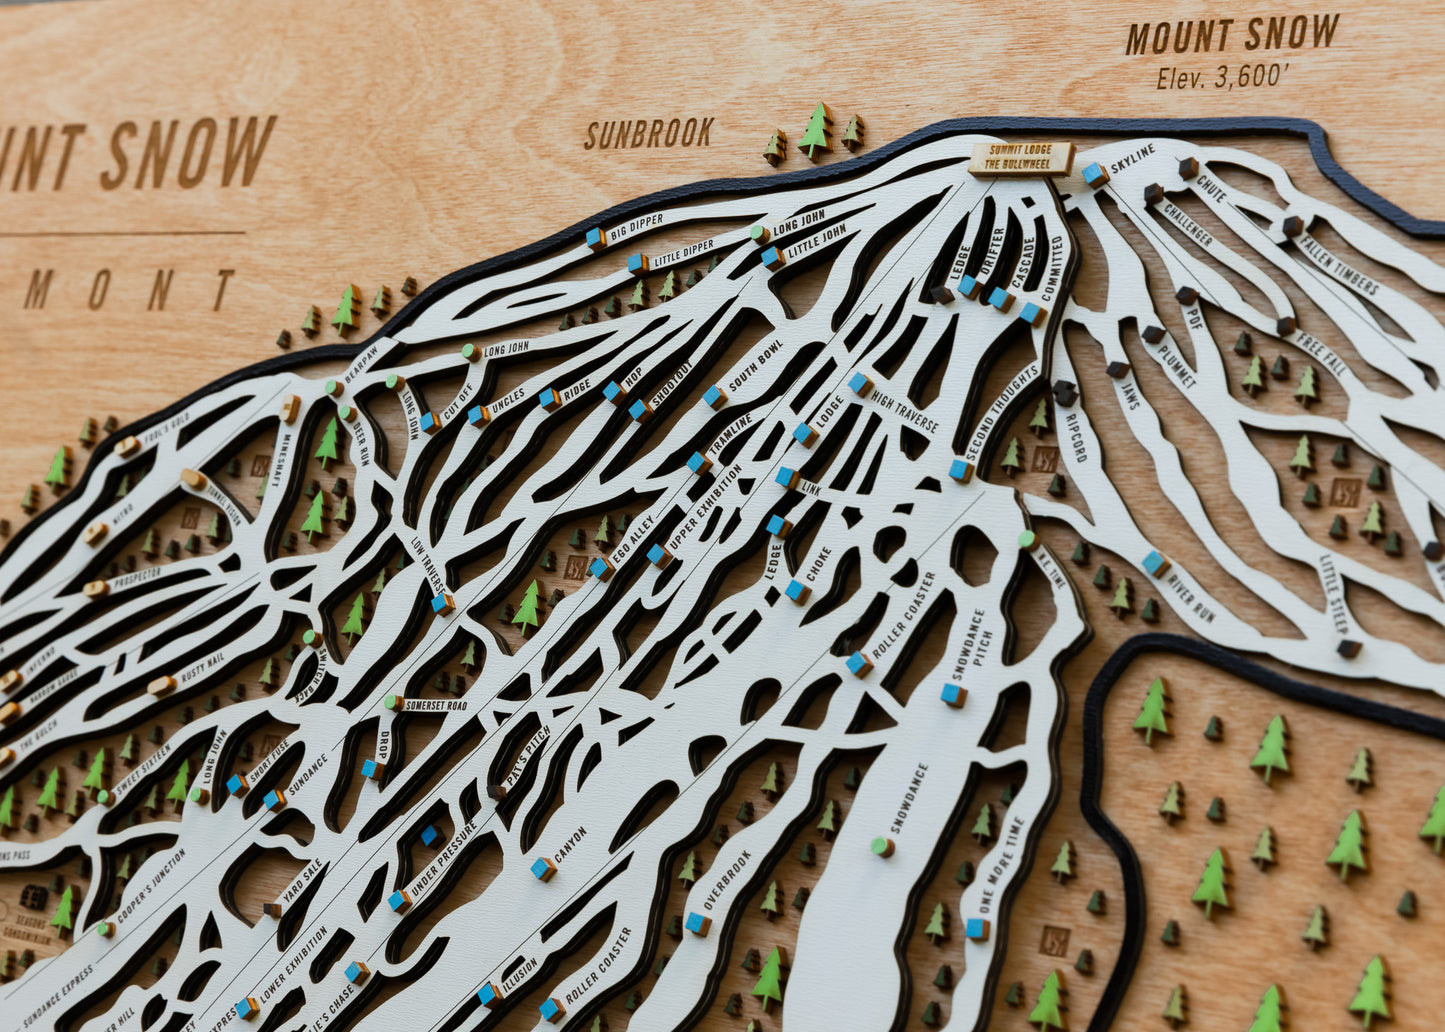 Mount Snow Vermont Wooden Ski Map Ski Gift Gift for Snowboarders